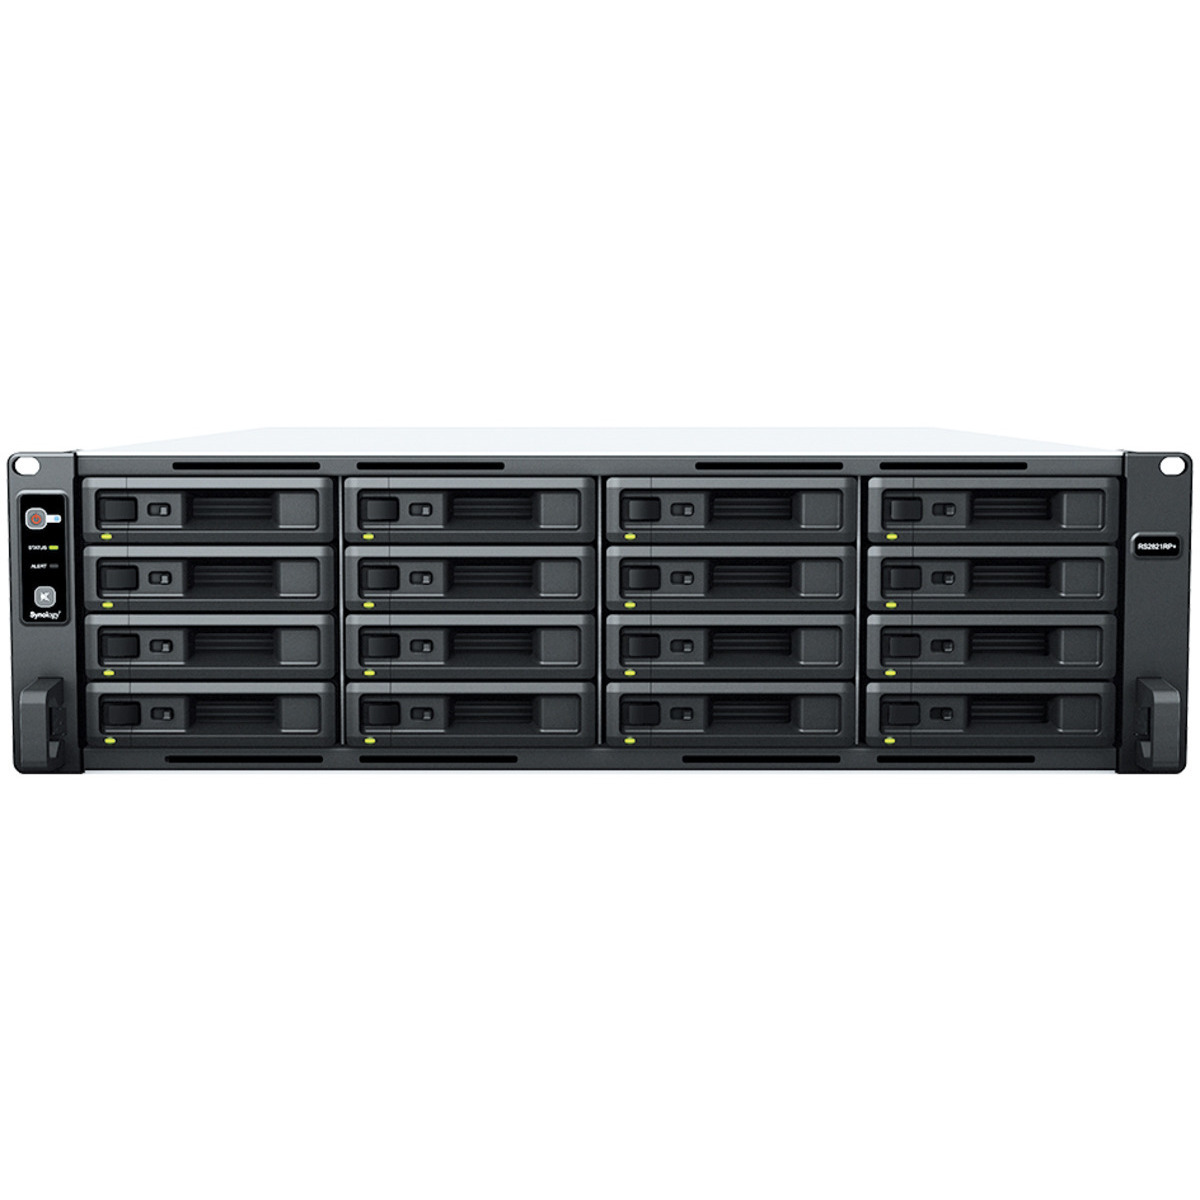 Synology RackStation RS2821RP+ 14.4tb 16-Bay RackMount Large Business / Enterprise NAS - Network Attached Storage Device 15x960gb Synology SAT5210 Series SAT5210-960G 2.5 530/500MB/s SATA 6Gb/s SSD ENTERPRISE Class Drives Installed - Burn-In Tested RackStation RS2821RP+